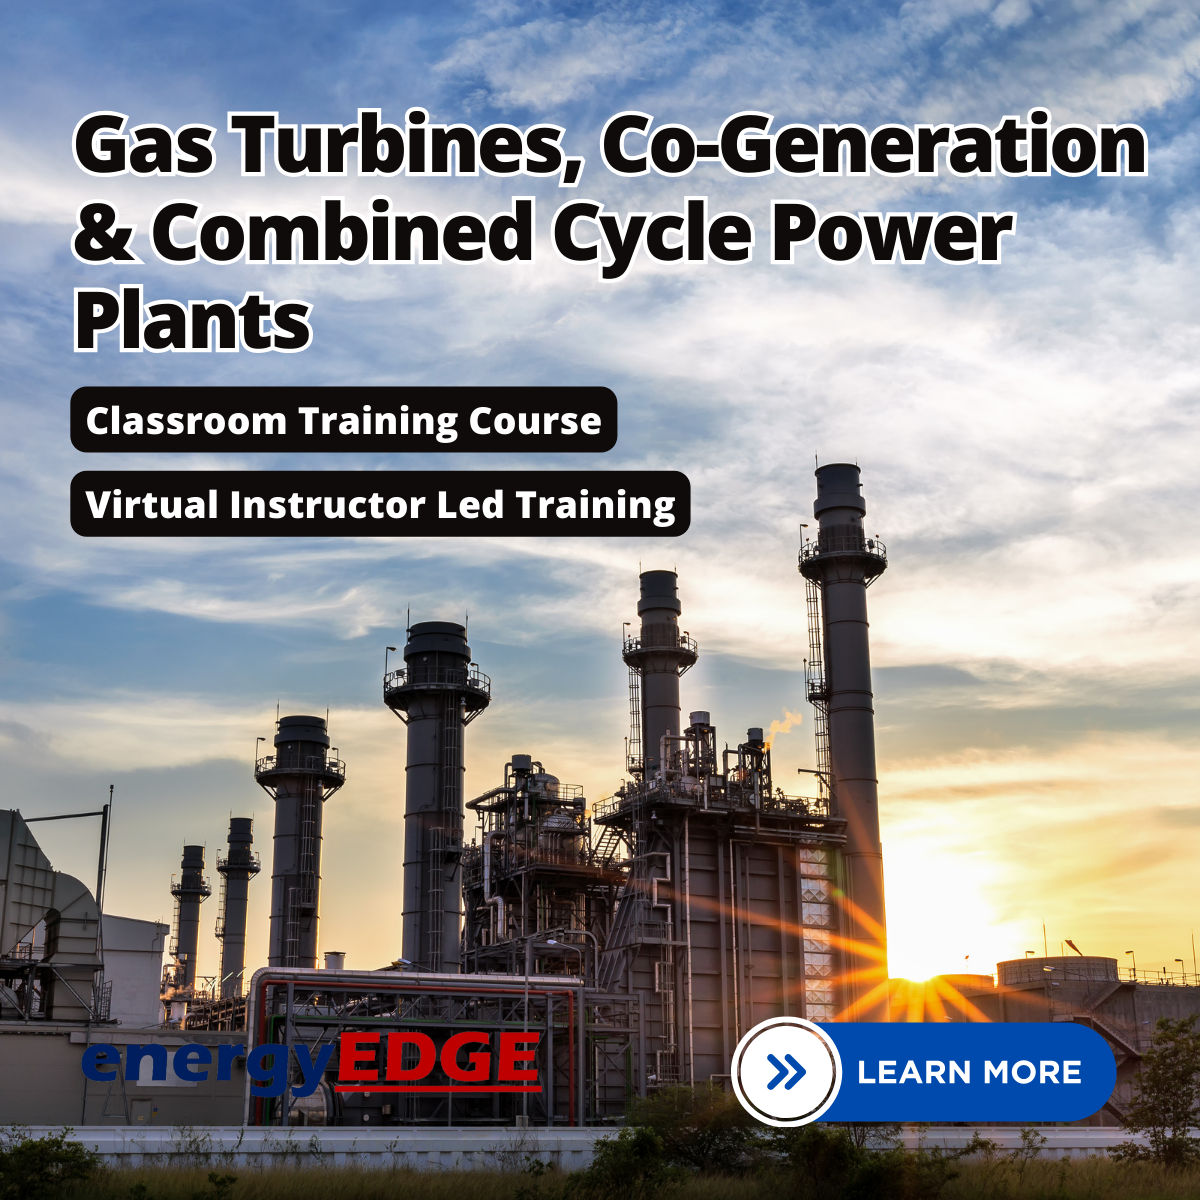 Gas Turbines, Co-Generation and Combined Cycle Power Plants